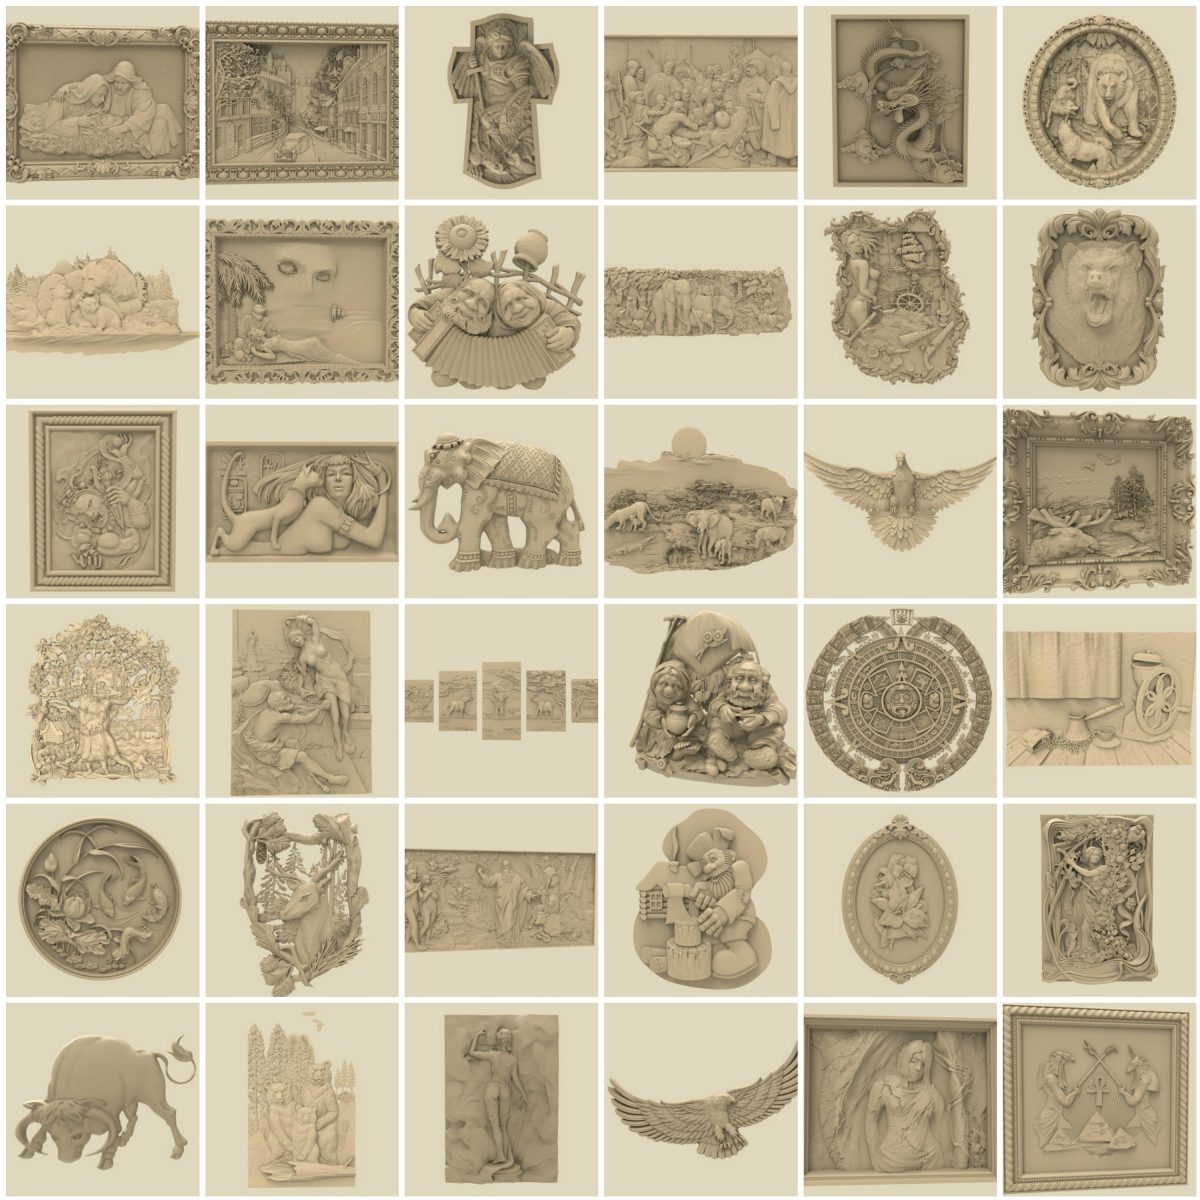 cnc collection stl files